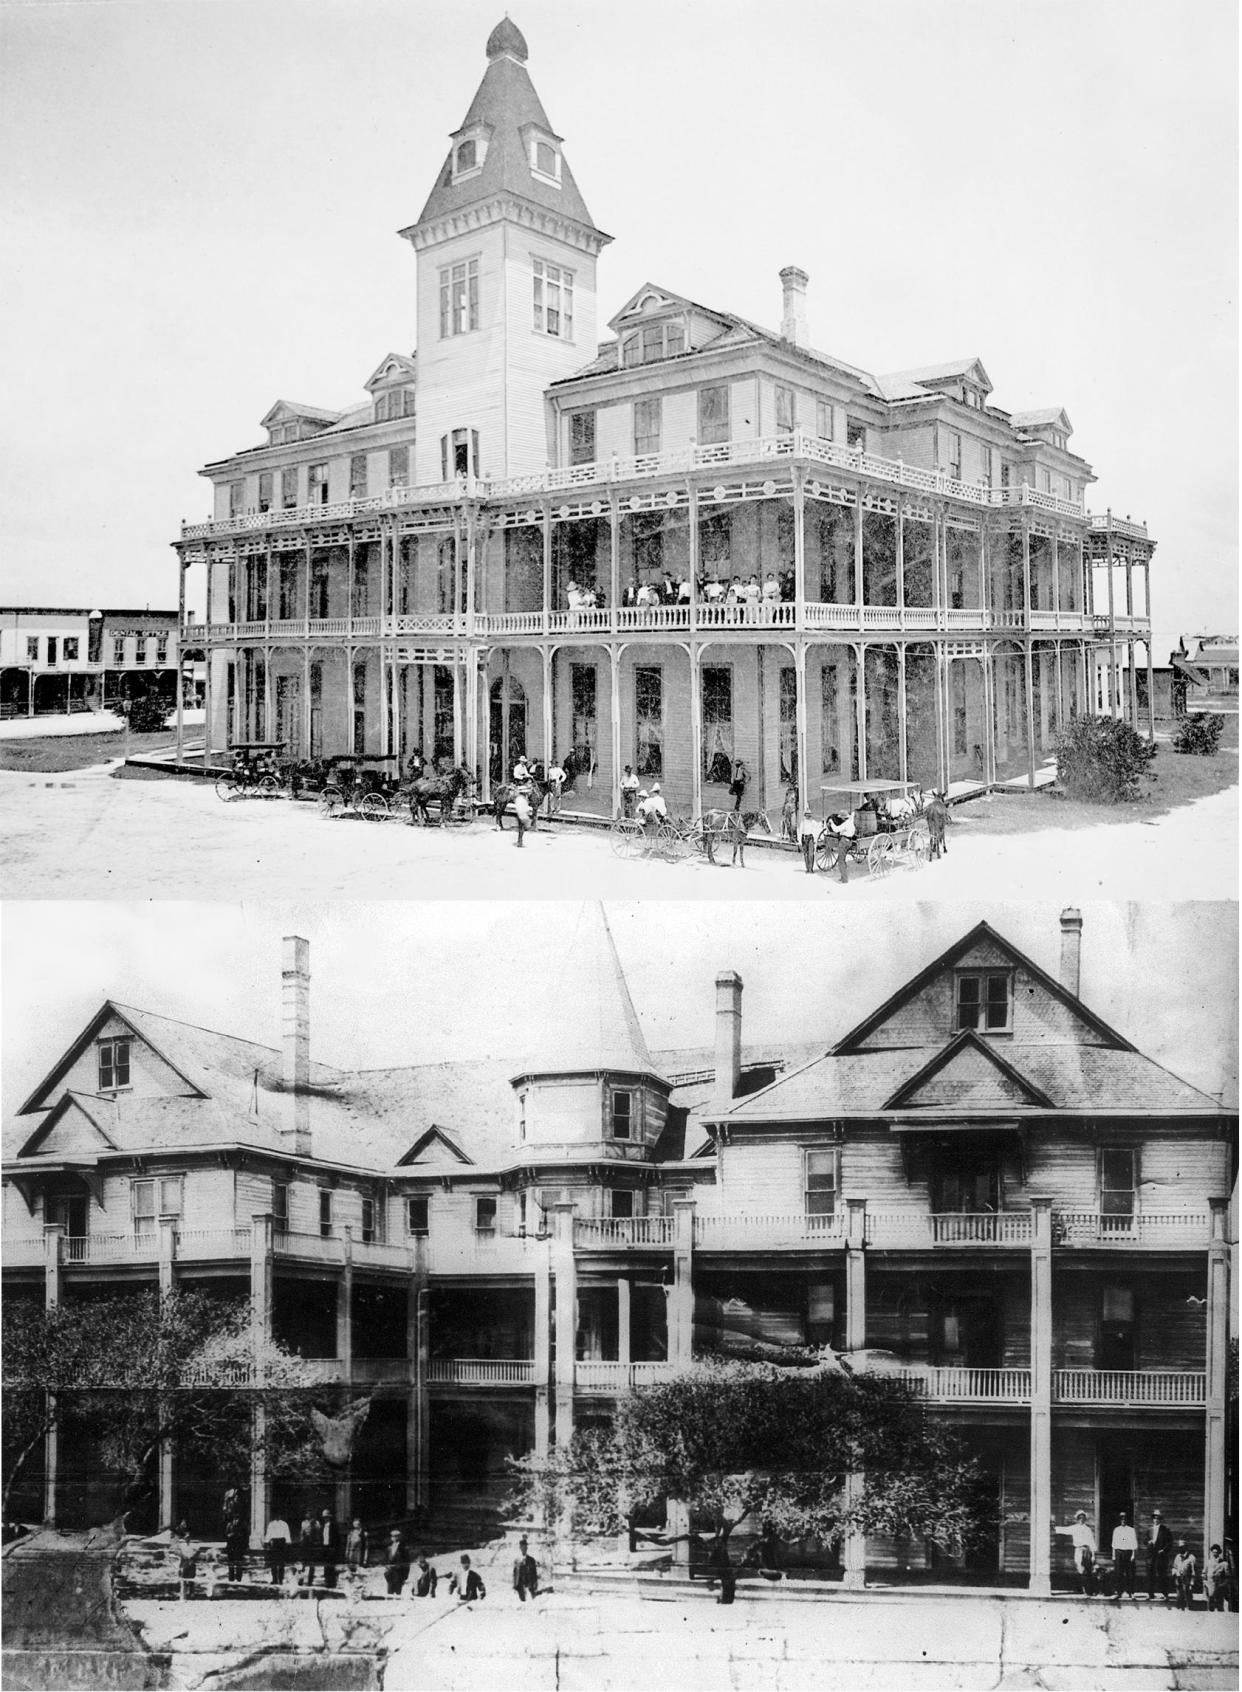 TOP: The Aransas Hotel, later renamed the Del Mar Hotel, was built on the Rockport waterfront in 1889. Visitors could stay in one of the 100 guest rooms and enjoy dancing and music in the large central dining room. The hotel closed sometime after 1910, and burned down in April 1919. BOTTOM: The Hotel Hoyt, later renamed Bayview Hotel, opened on South Commercial Street in Aransas Pass in 1891. It eventually closed down in the mid-1910s and was destroyed in the 1919 hurricane.